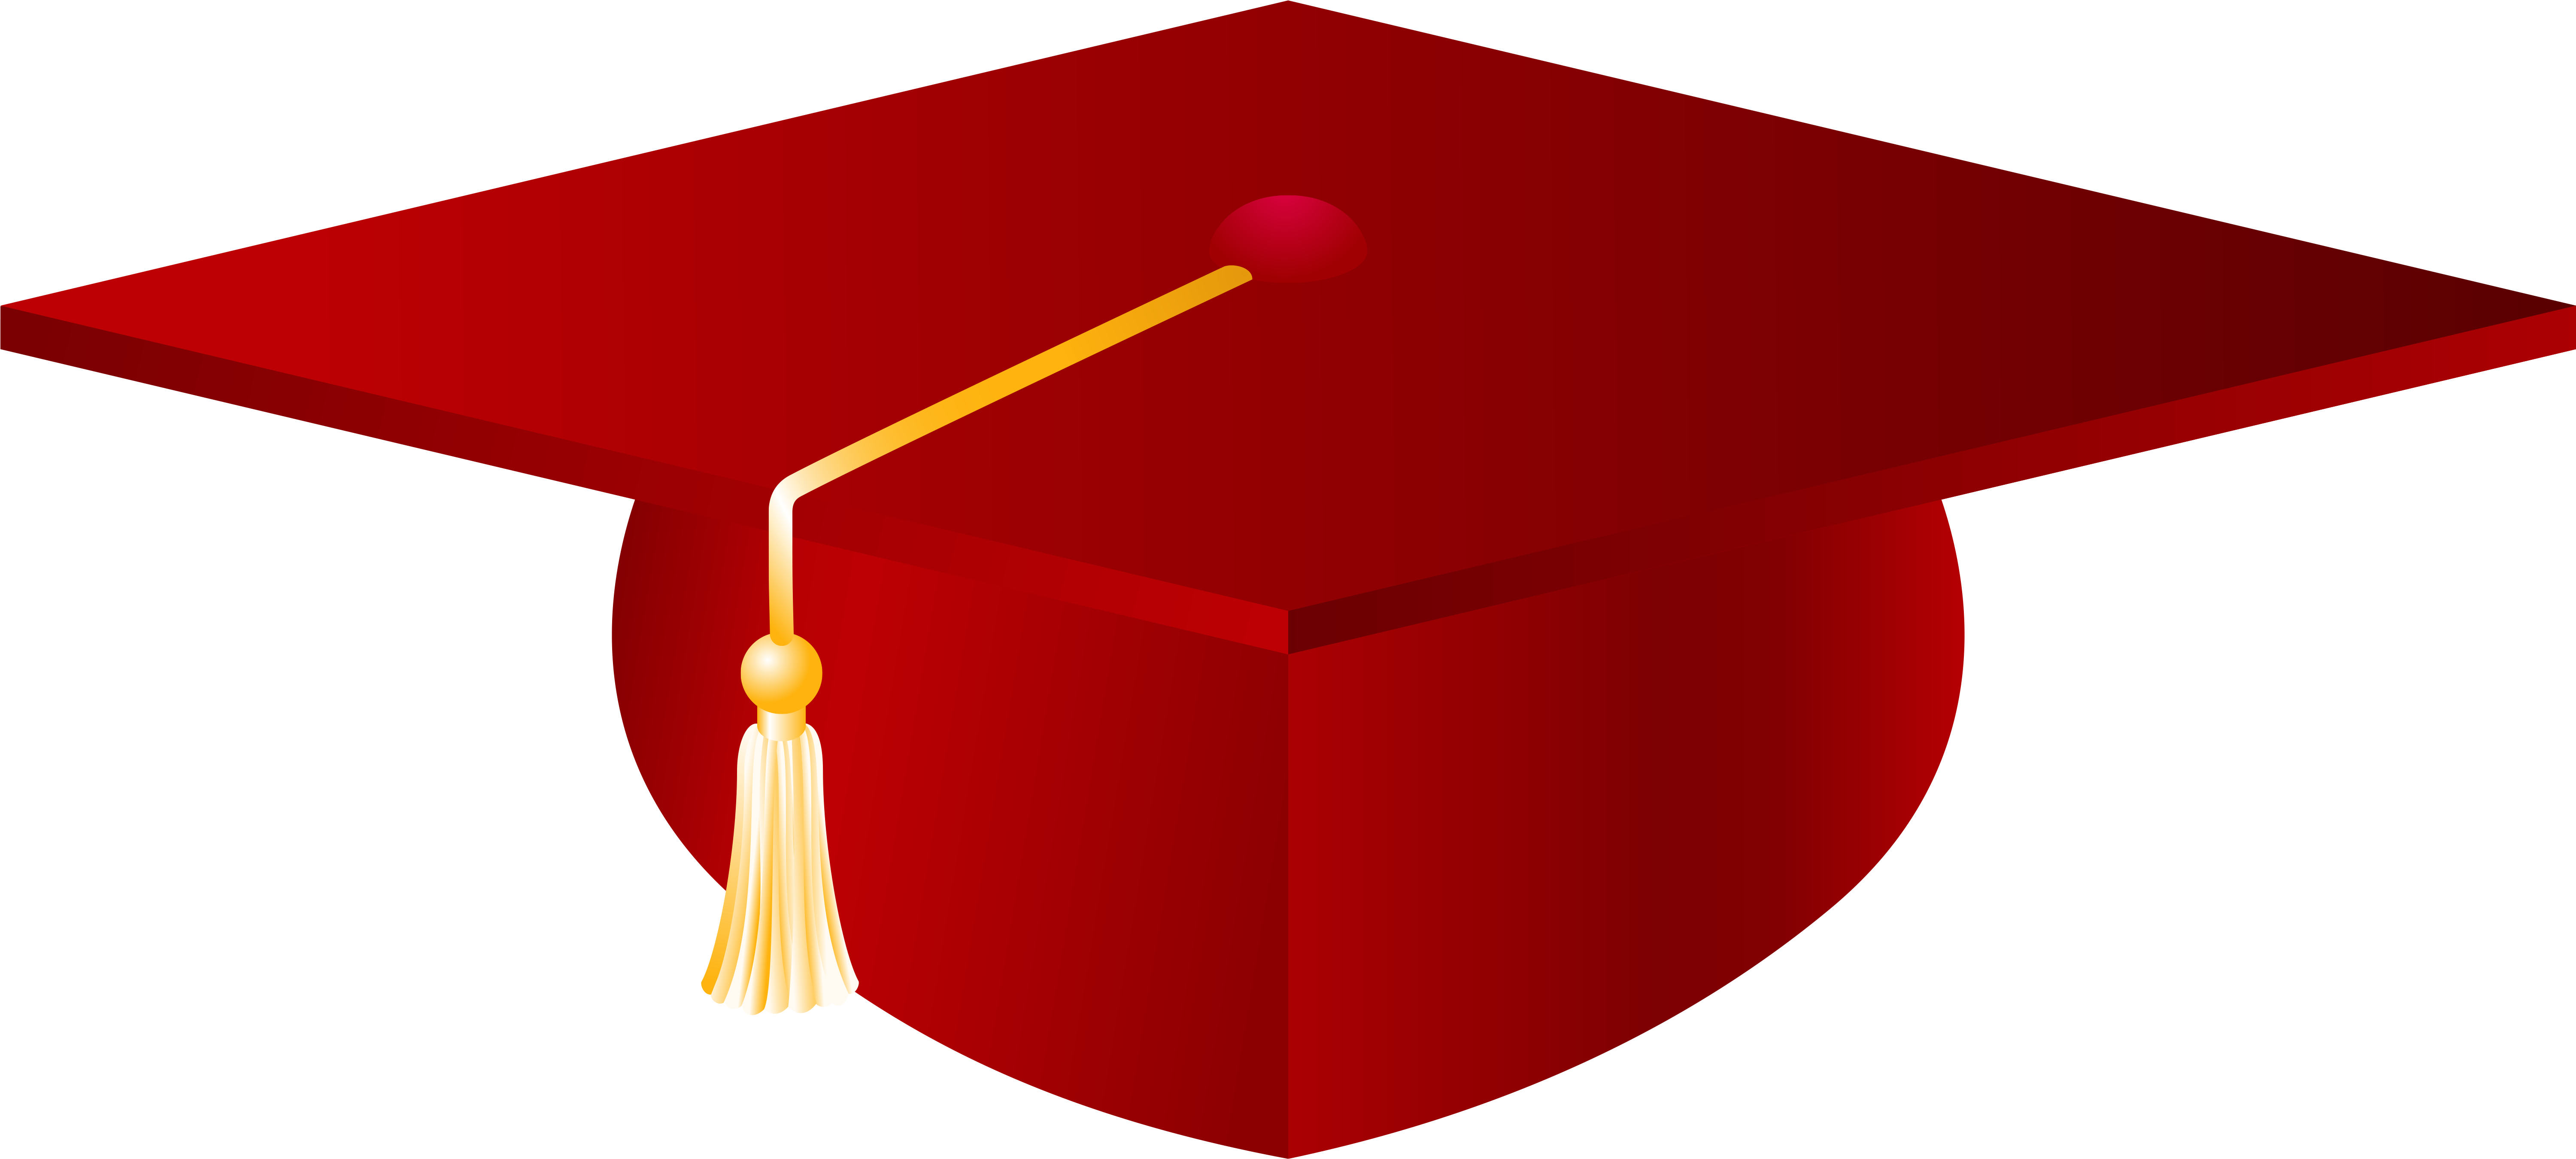 Clip Art Clip Art Graduation Cap - Graduation Cap Png (6144x2904)